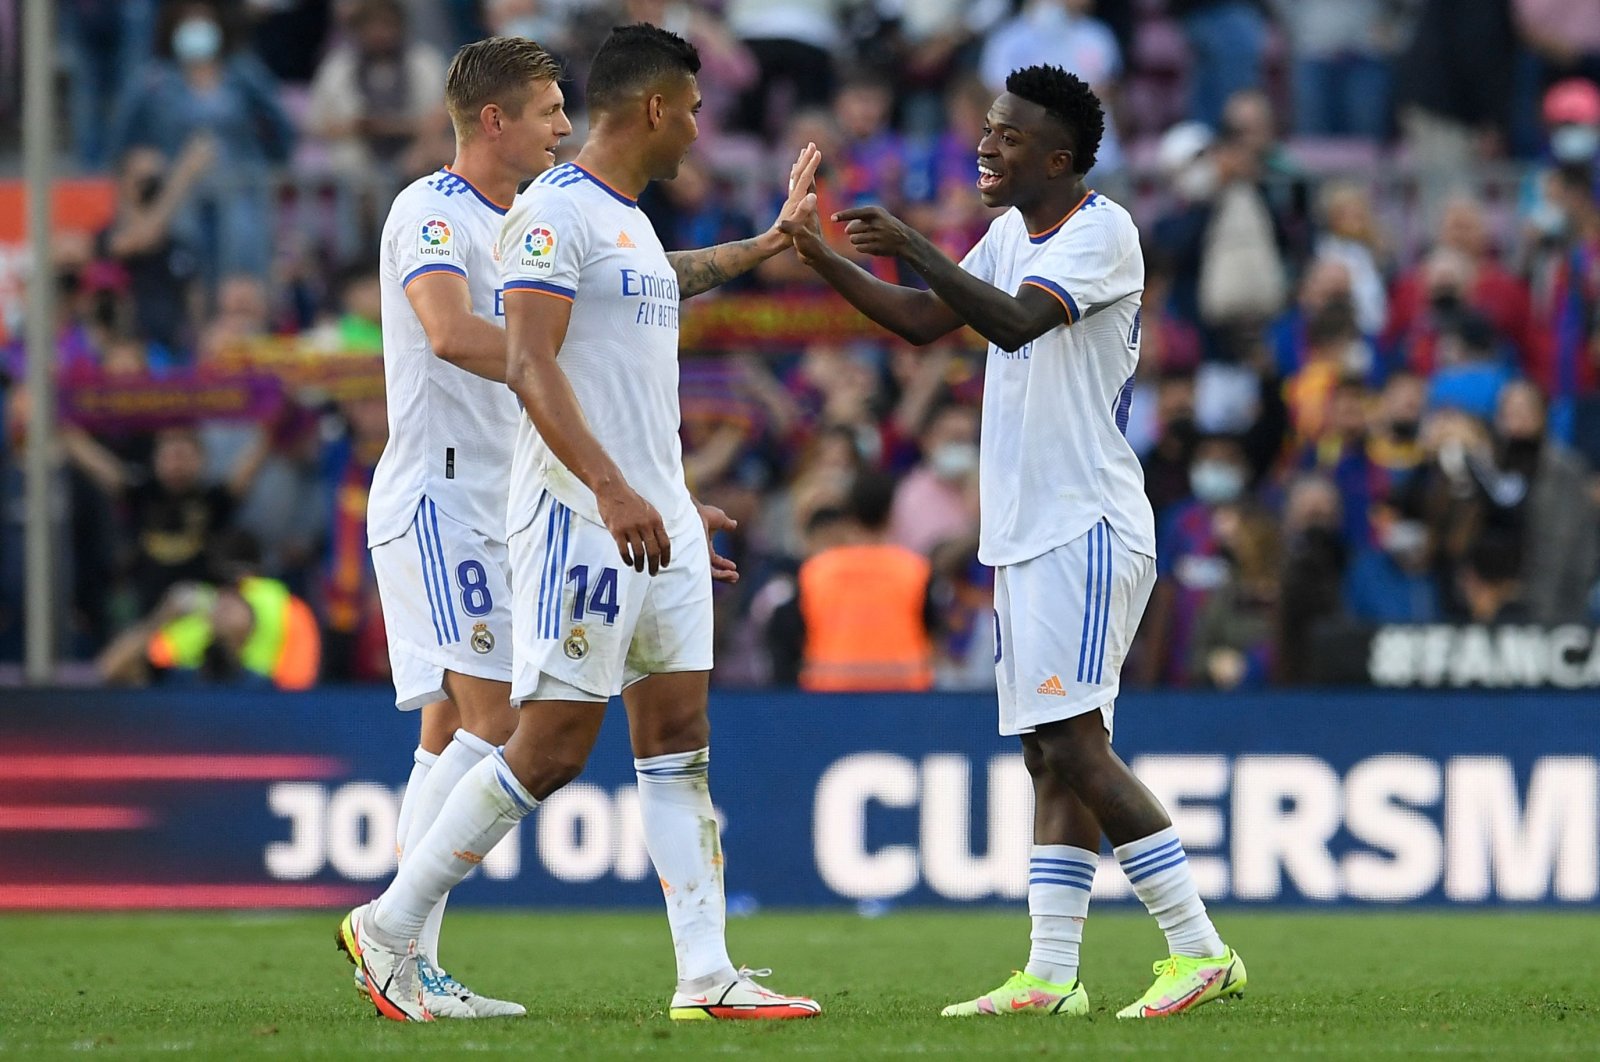 Real Madrid's German midfielder Toni Kroos (L), Real Madrid's Brazilian midfielder Casemiro (C) and Real Madrid's Brazilian forward Vinicius Junior celebrate their win at the end of the Spanish League football match between FC Barcelona and Real Madrid CF at the Camp Nou stadium in Barcelona, Spain, Oct. 24, 2021. (AFP Photo)